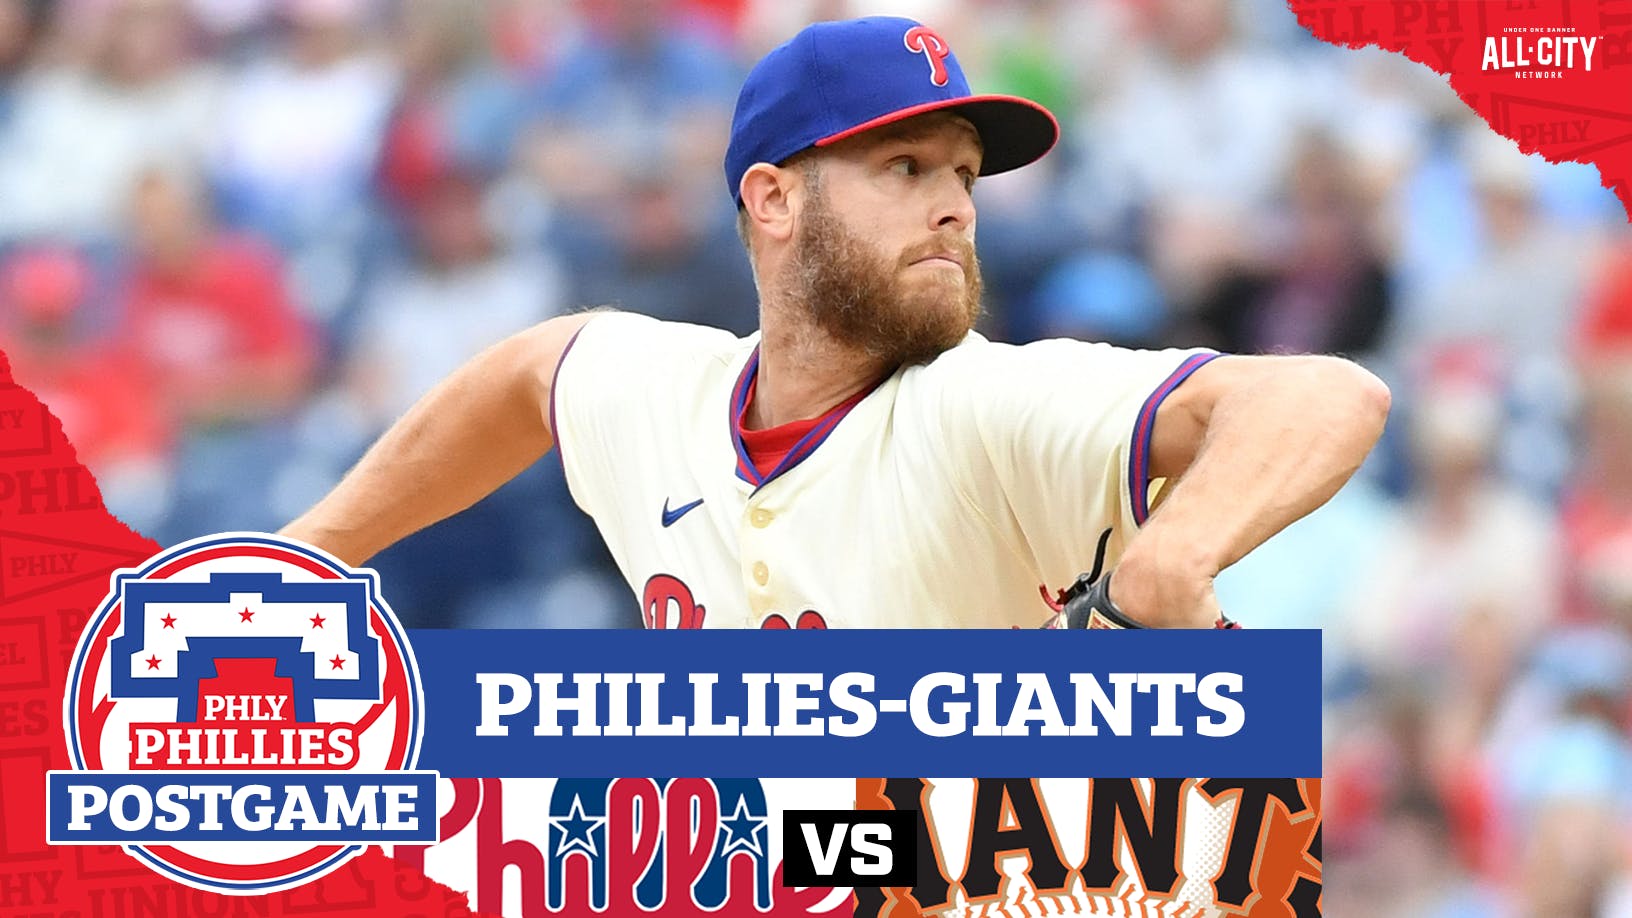 PHLY Phillies Podcast | Zack Wheeler strikes out 11, Phillies complete four game sweep over San Francisco Giants